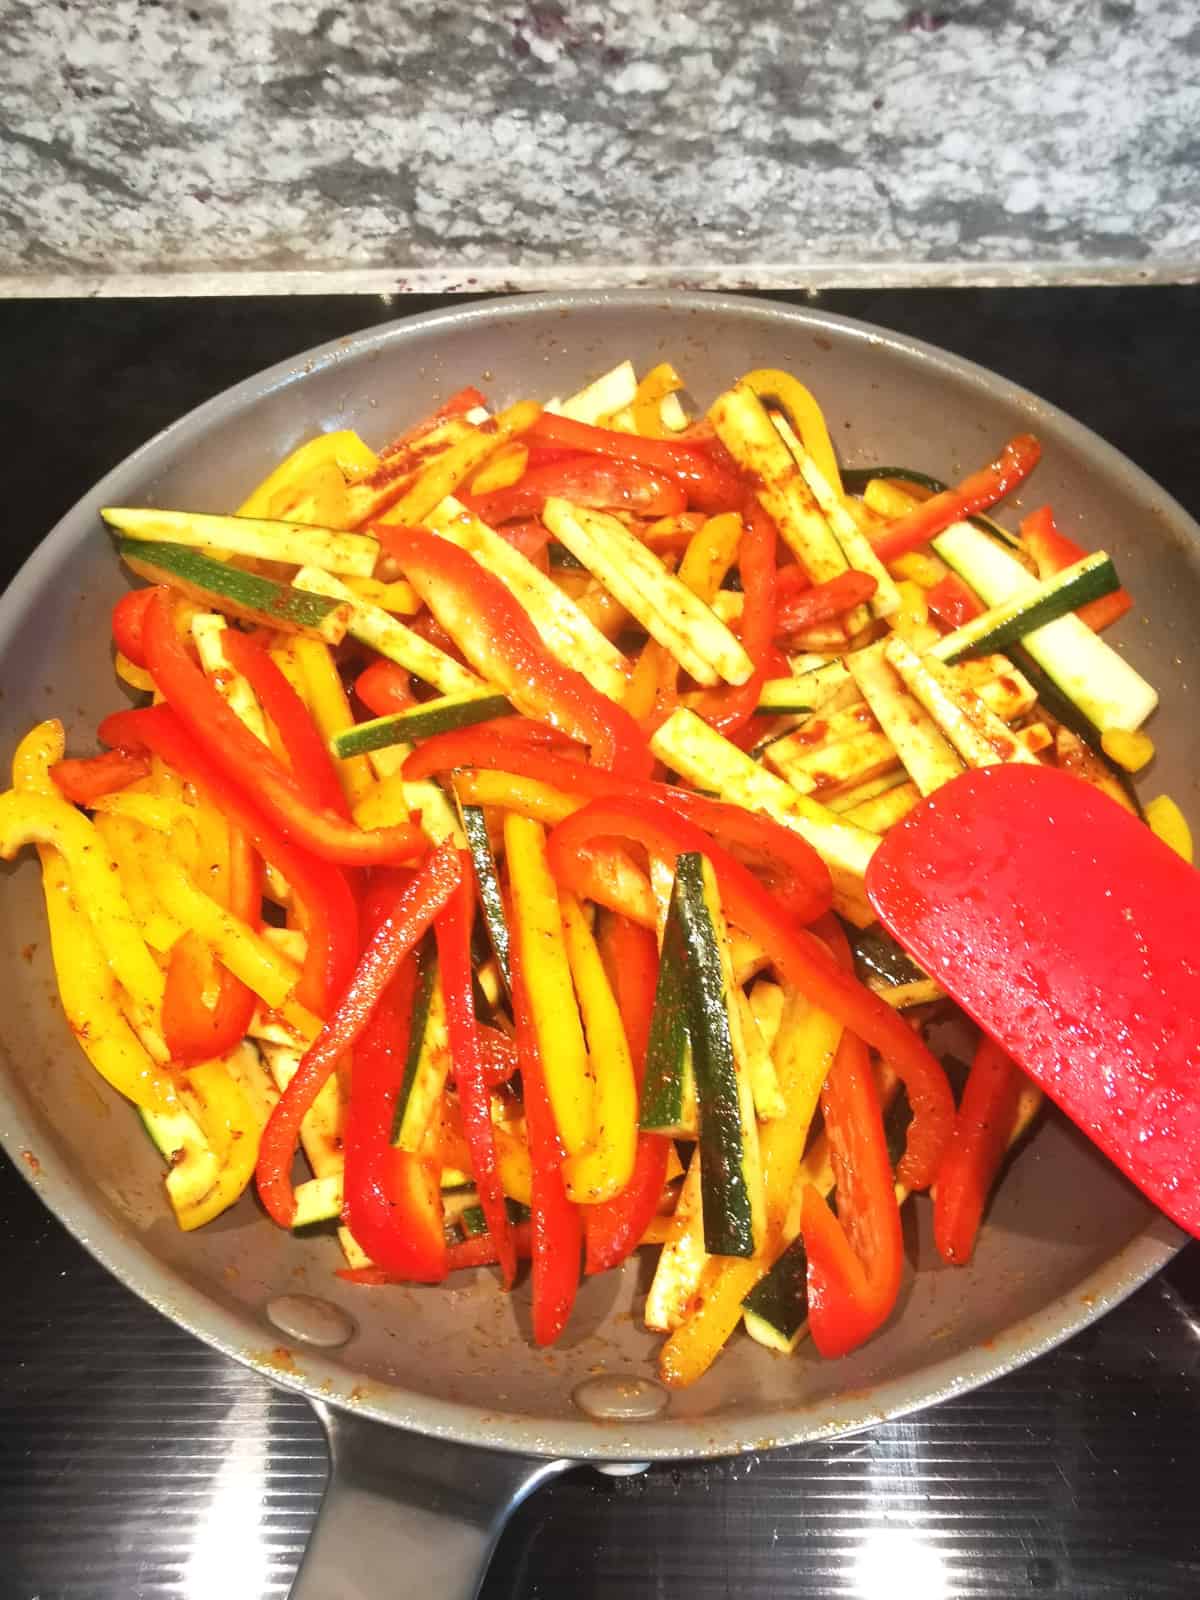 onion, bell peppers and zucchini sauteed in frying pan with red spatula.